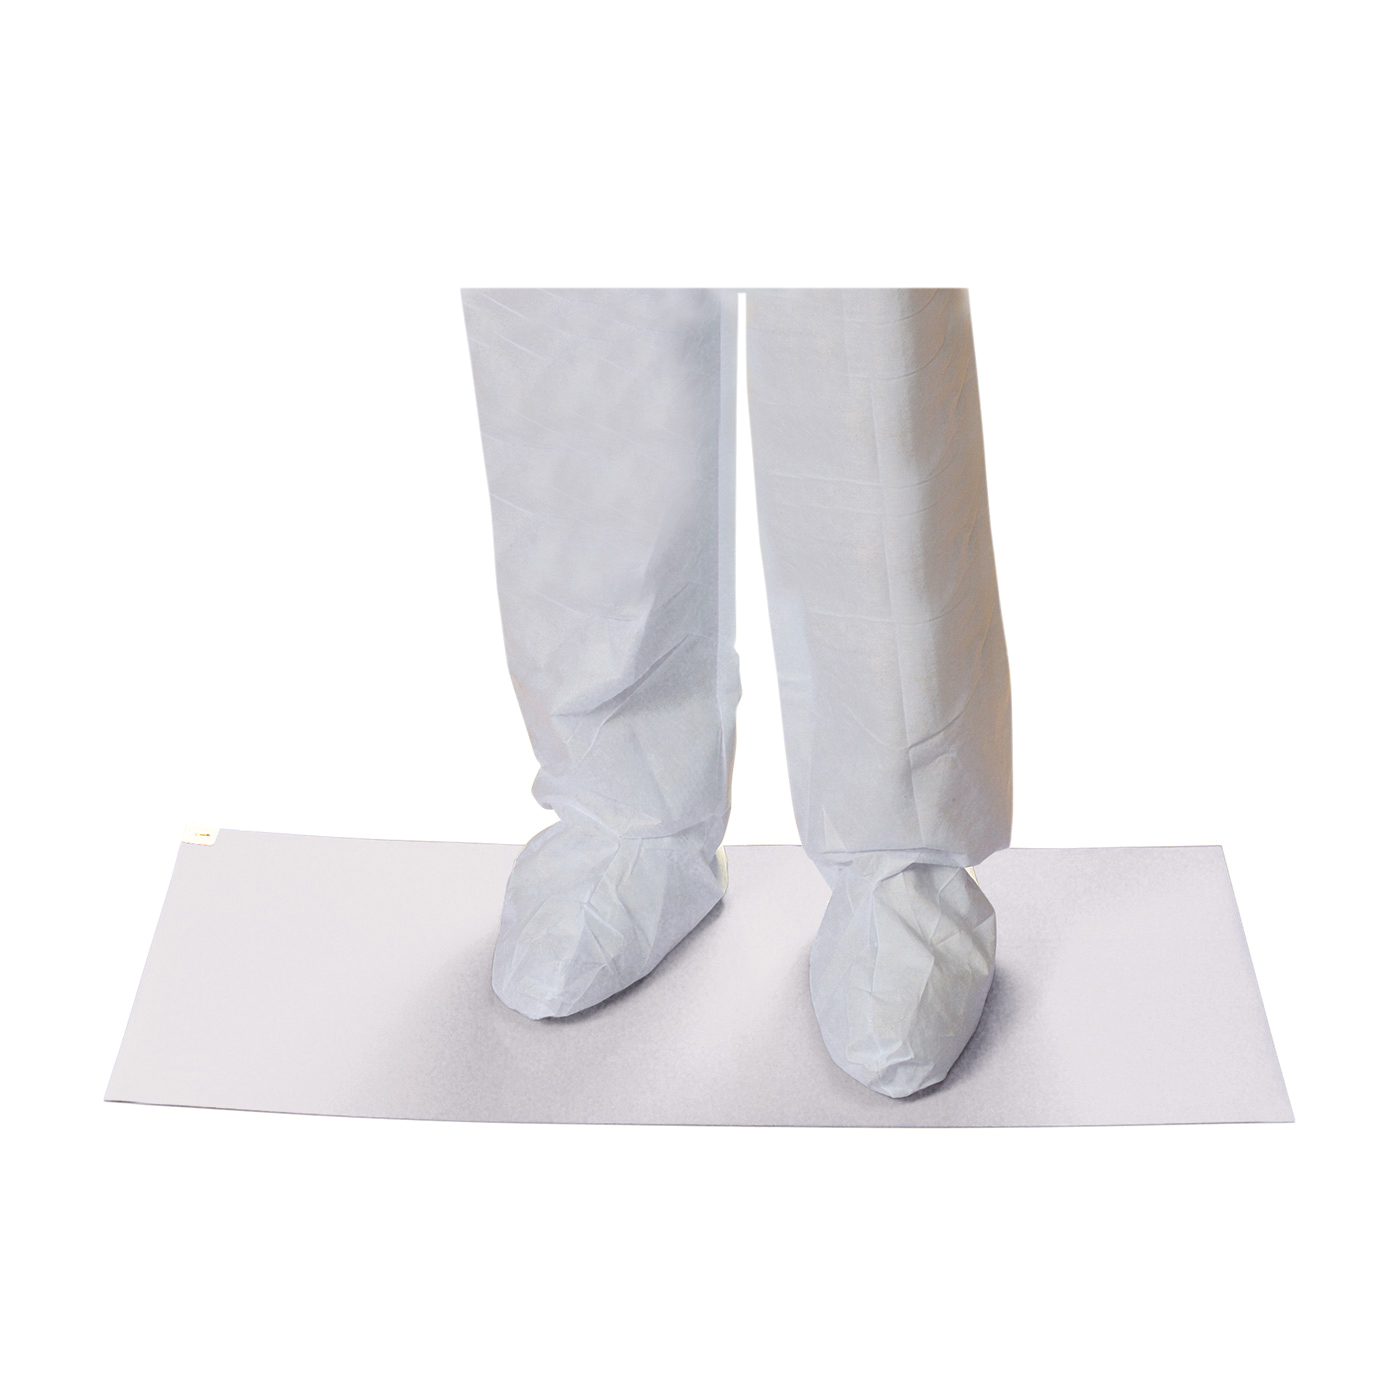 PIP® CleanTeam® 100-93-243638W Contamination Control Clean Room Mat, 36 in L x 24 in W x 0.05 mm THK, White, Polyethelene, 30 Sheets per Mat